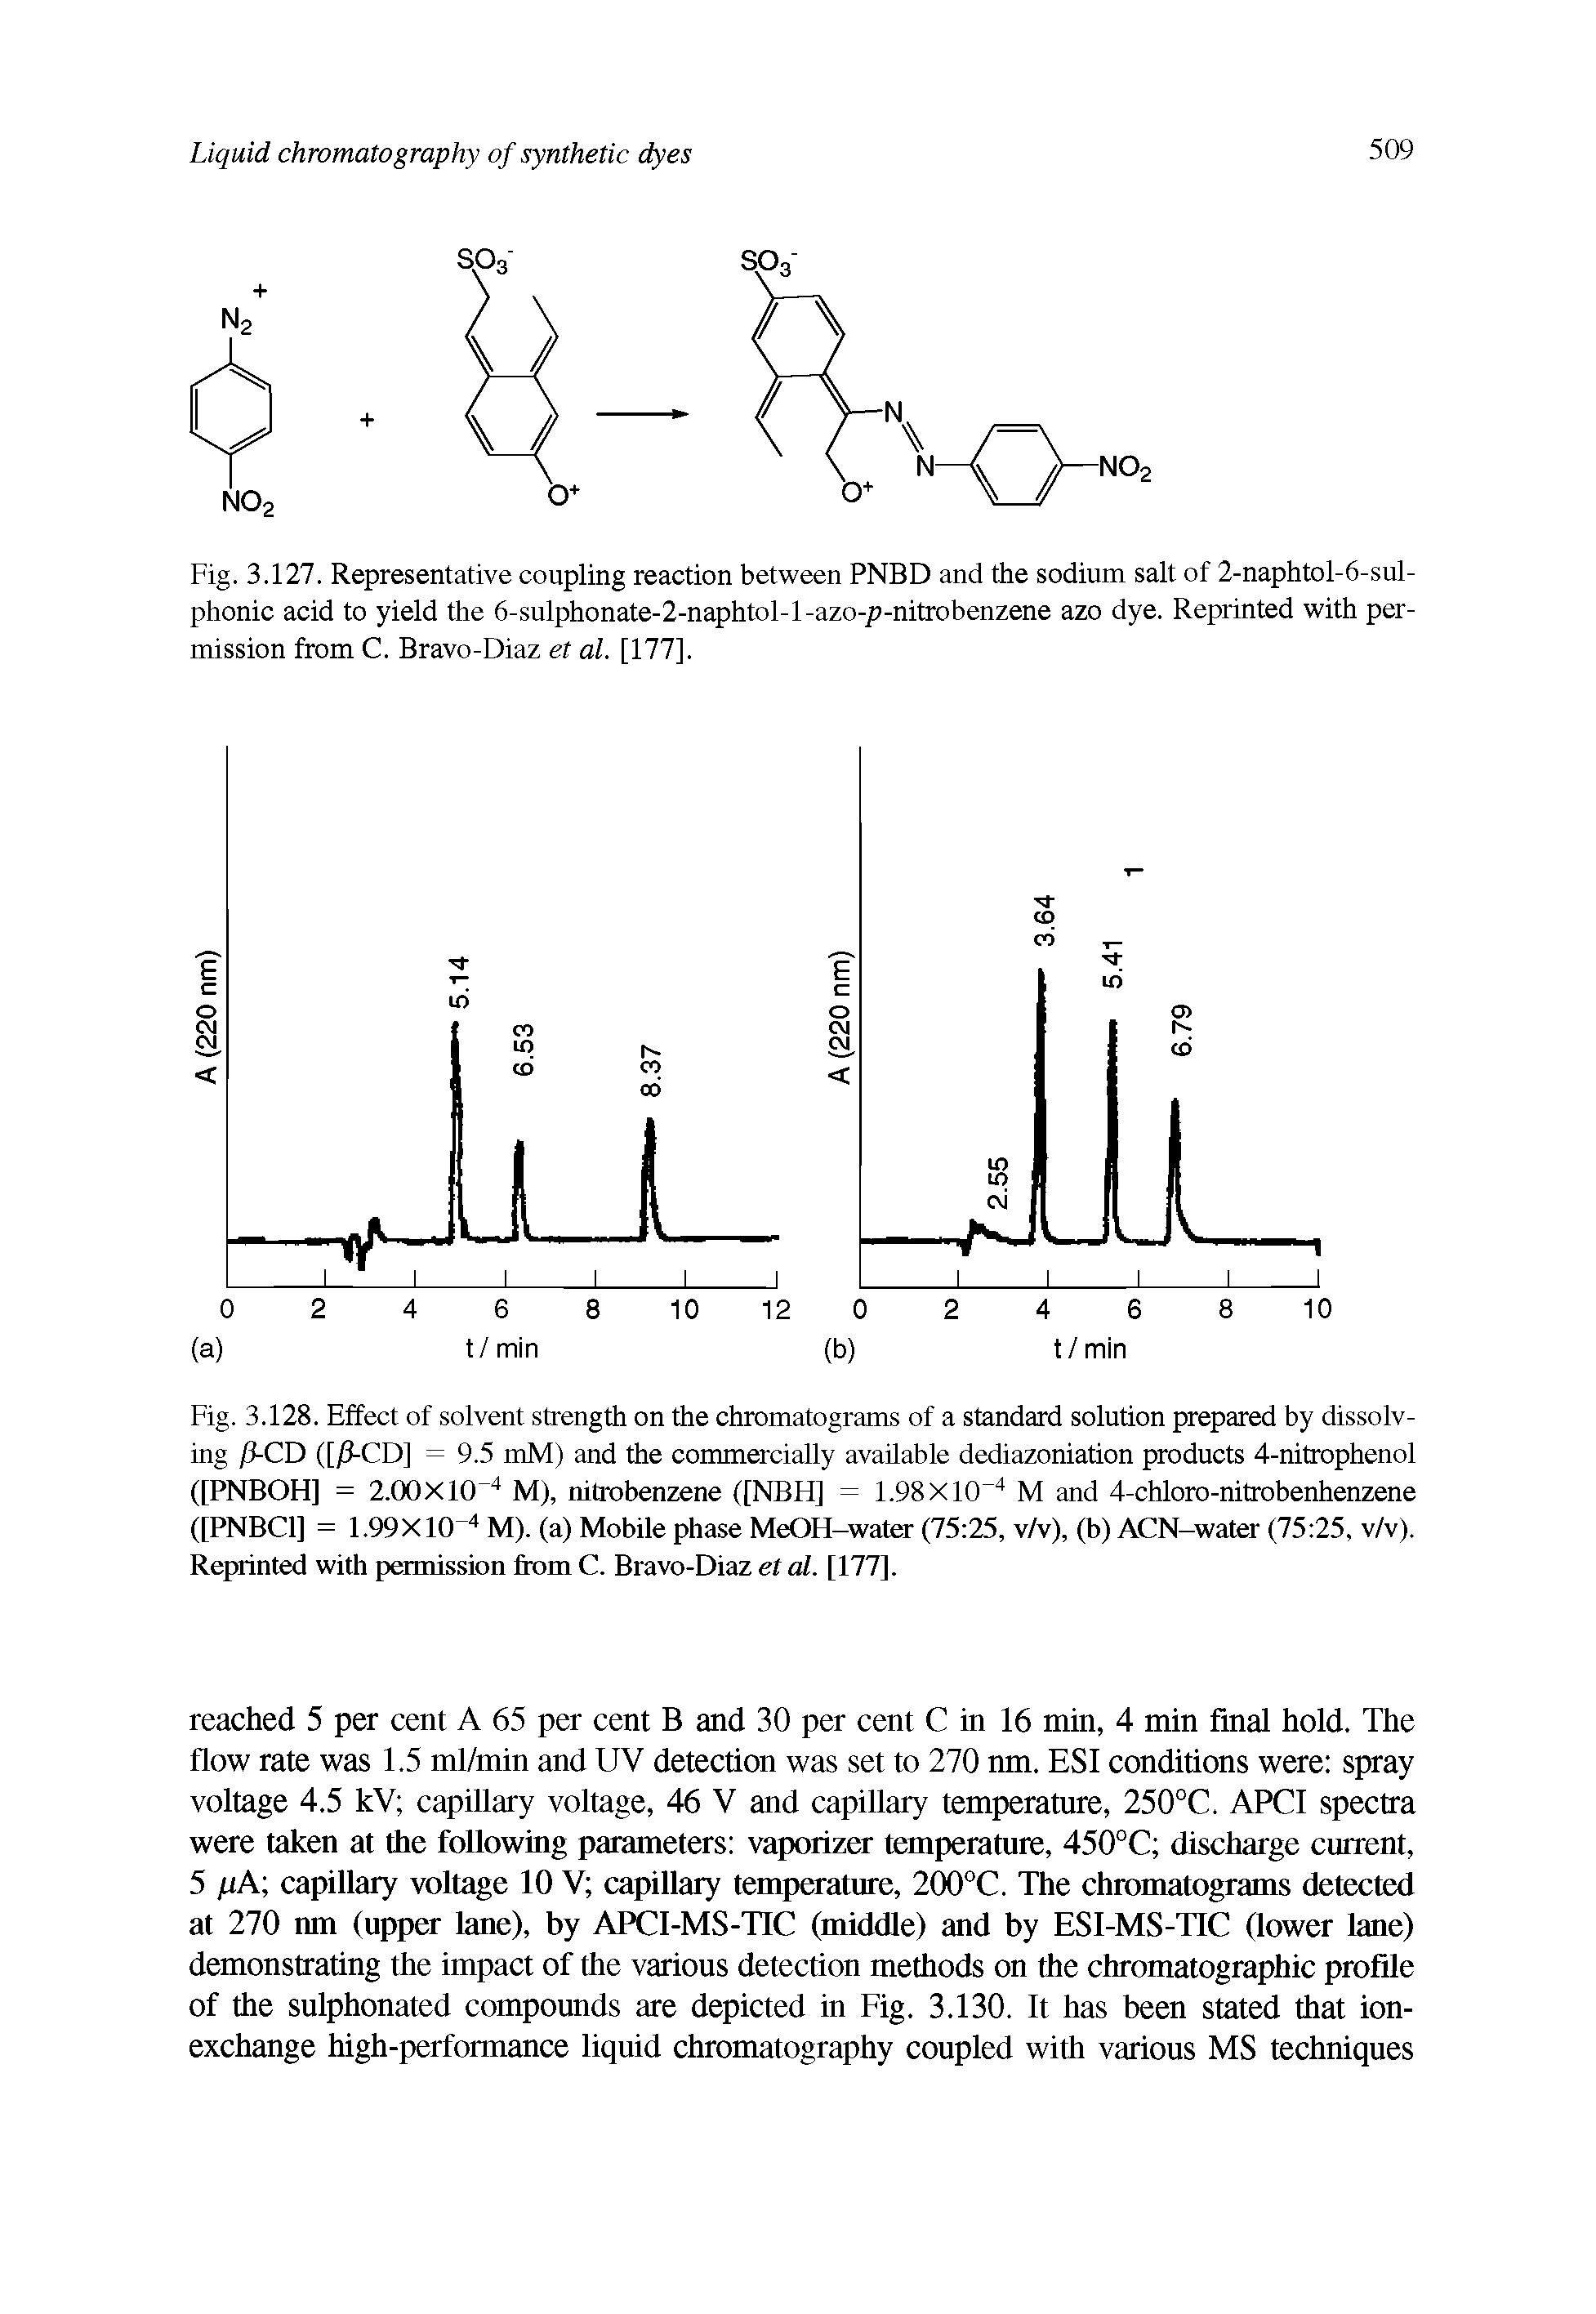 Fig. 3.128. Effect of solvent strength on the chromatograms of a standard solution prepared by dissolving /1-CD ([/1-CD] = 9.5 mM) and the commercially available dediazoniation products 4-nitrophenol ([PNBOH] = 2.00X104 M), nitrobenzene ([NBH] = 1.98X10-4 M and 4-chloro-nitrobenhenzene ([PNBC1] = 1.99X10 4 M). (a) Mobile phase MeOH-water (75 25, v/v), (b) ACN-water (75 25, v/v). Reprinted with permission from C. Bravo-Diaz et al. [177].